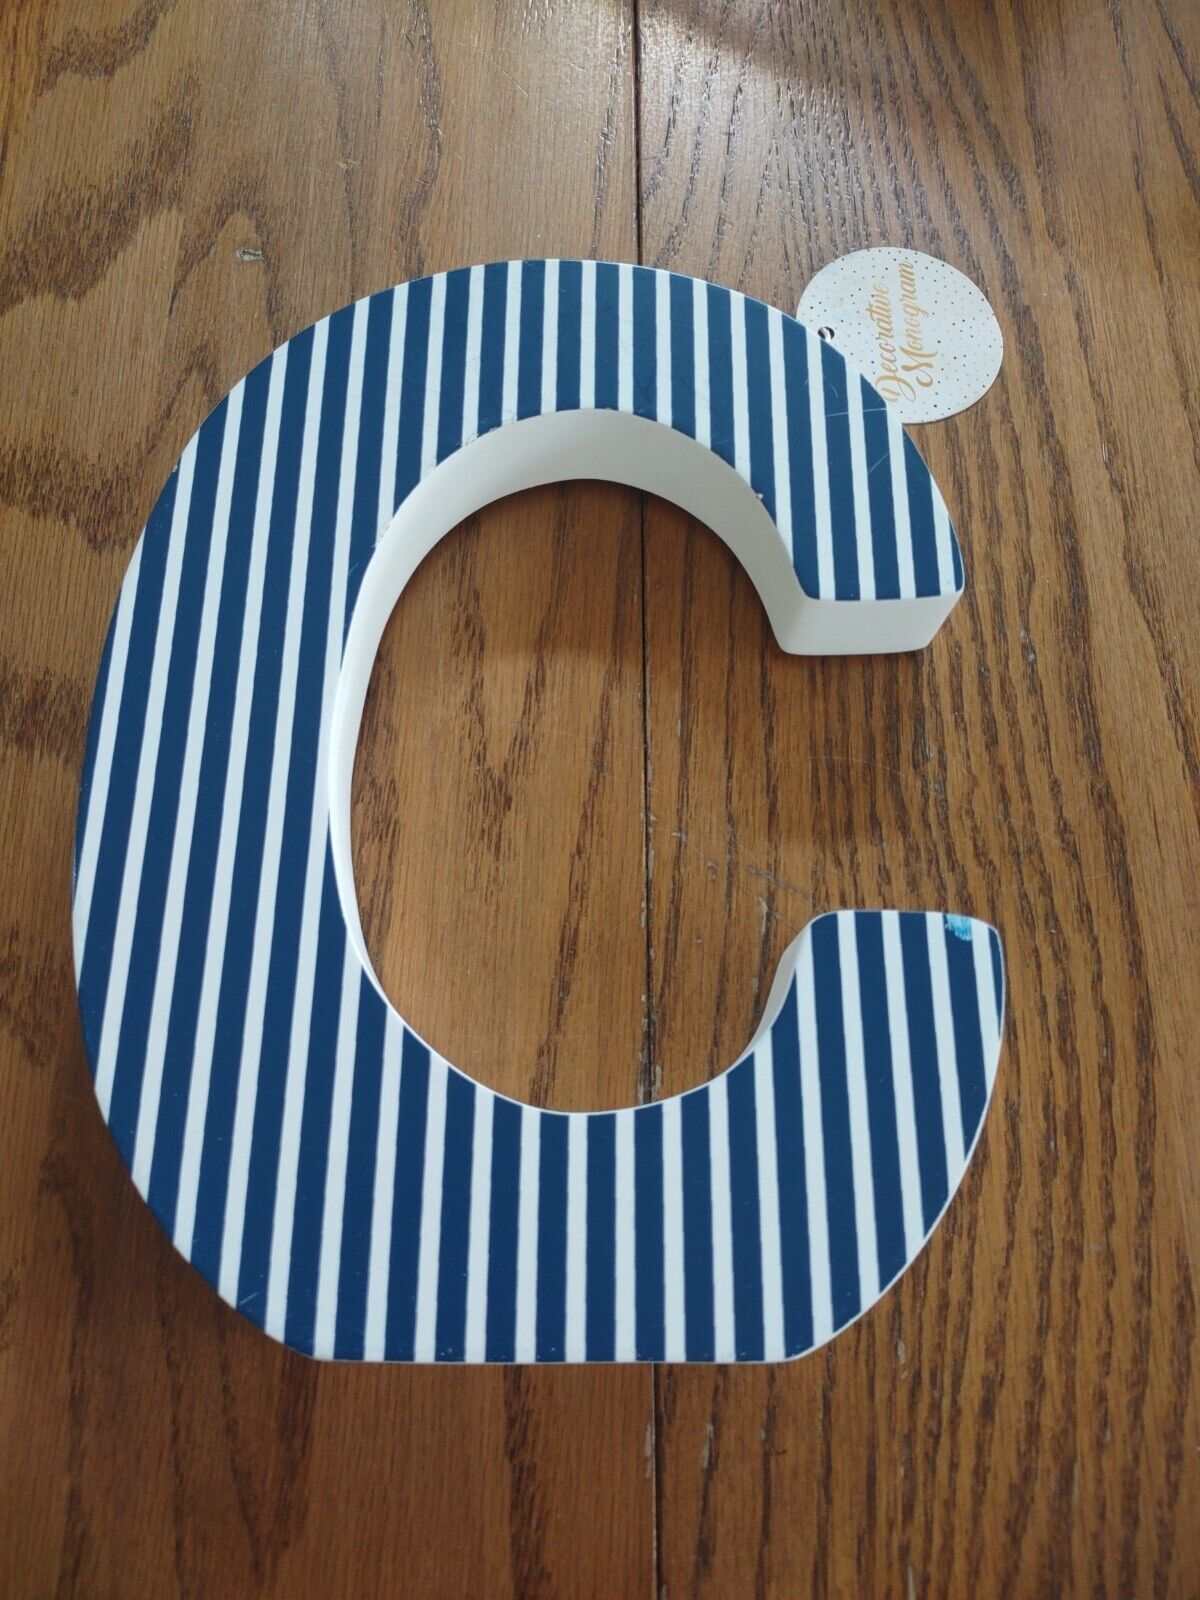 Primary image for Pier 1 Letter "C" Wooden Wall Art